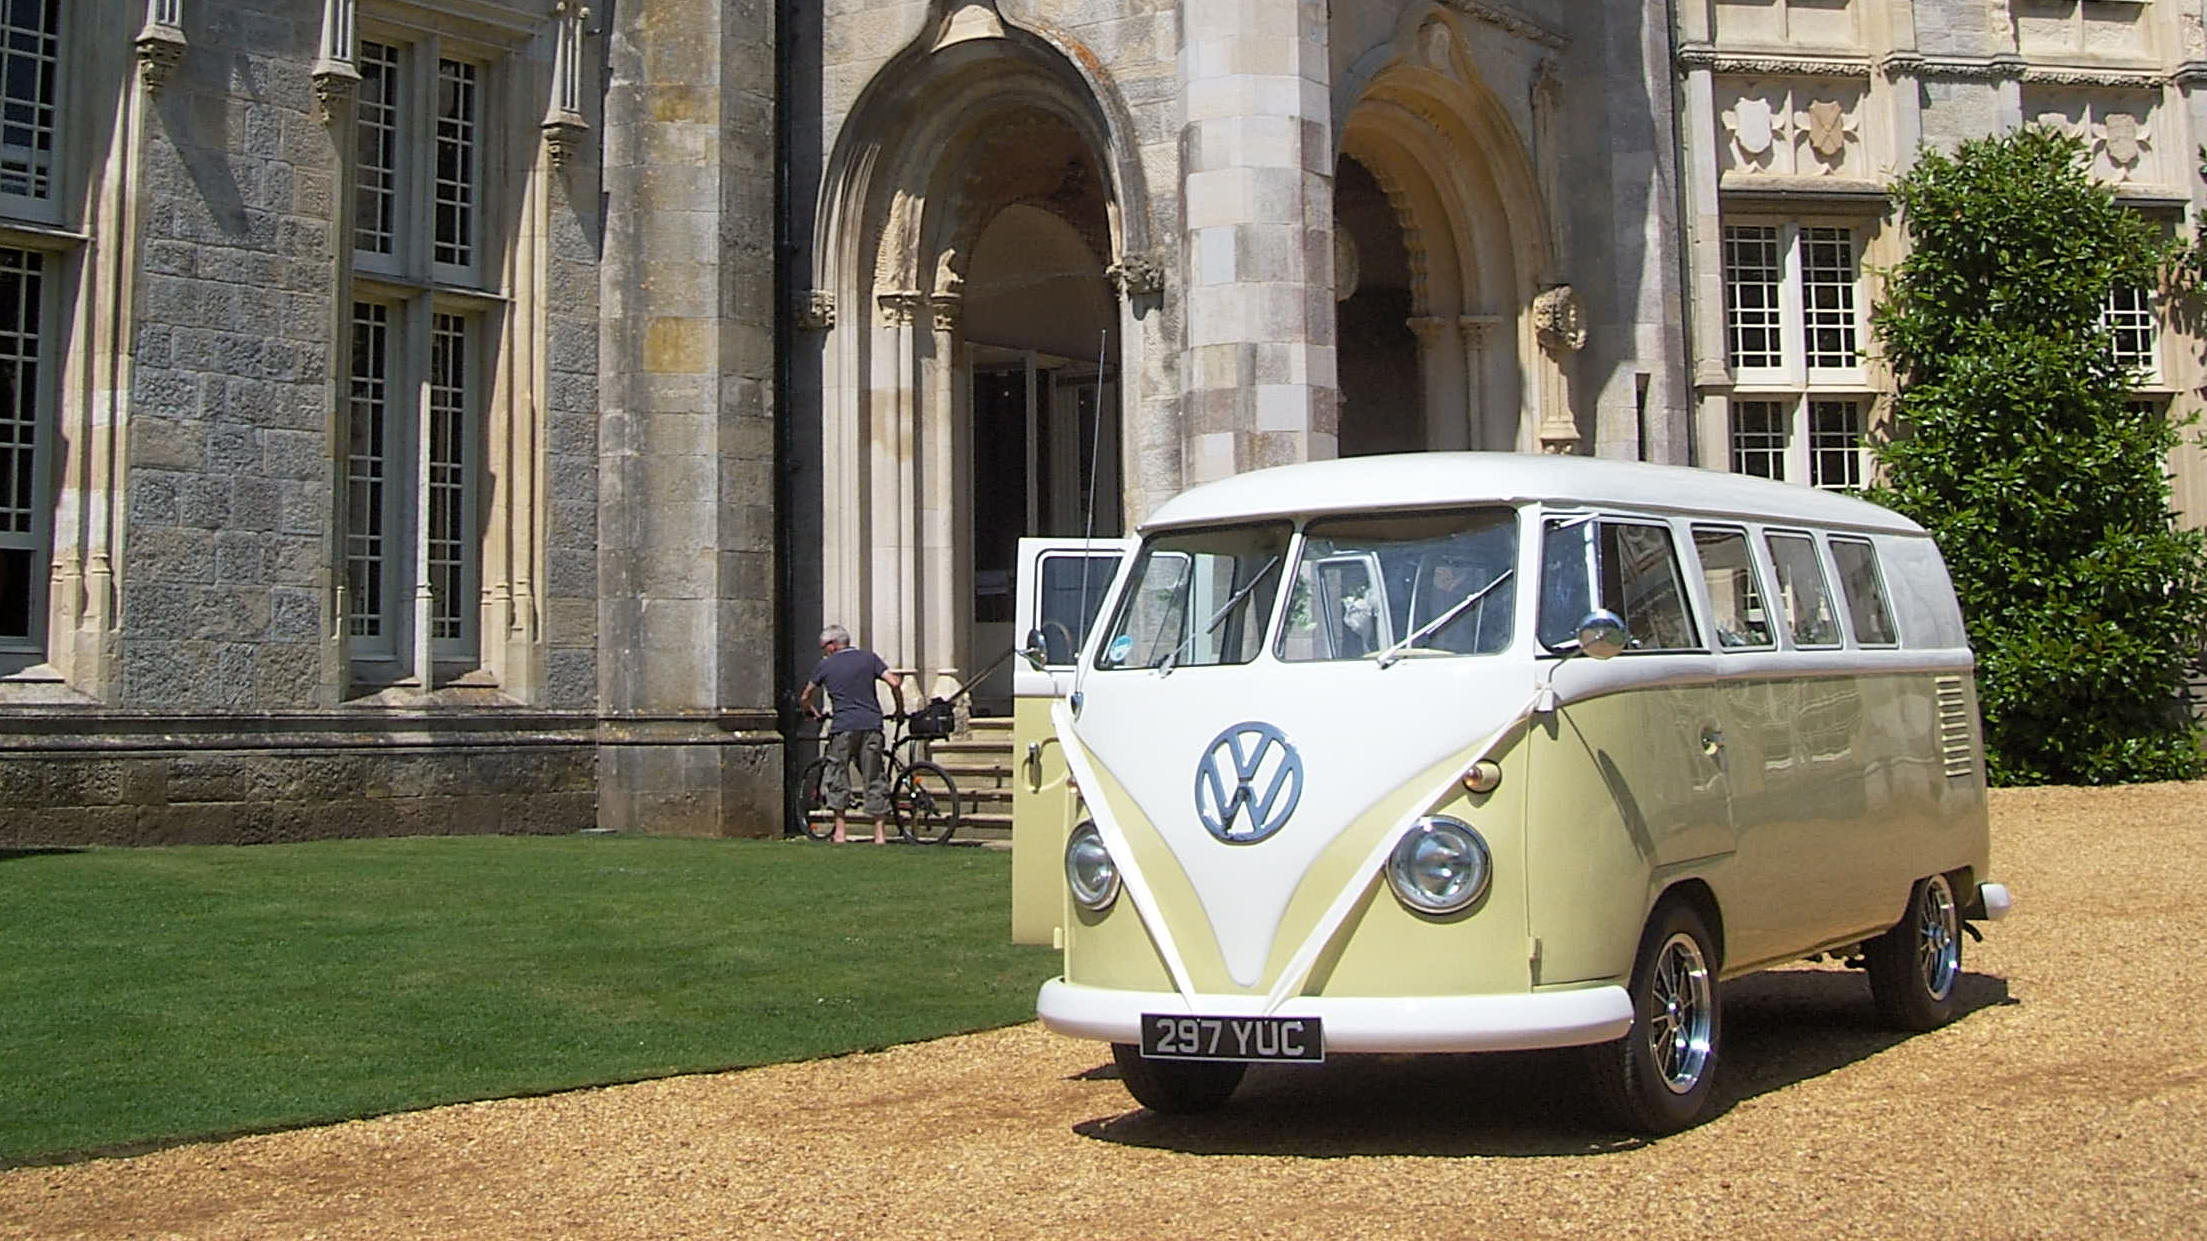 Retro Classic Volkswagen Campervan decorated with white ribbons at a local Okeford Fitzpaine wedding venue.